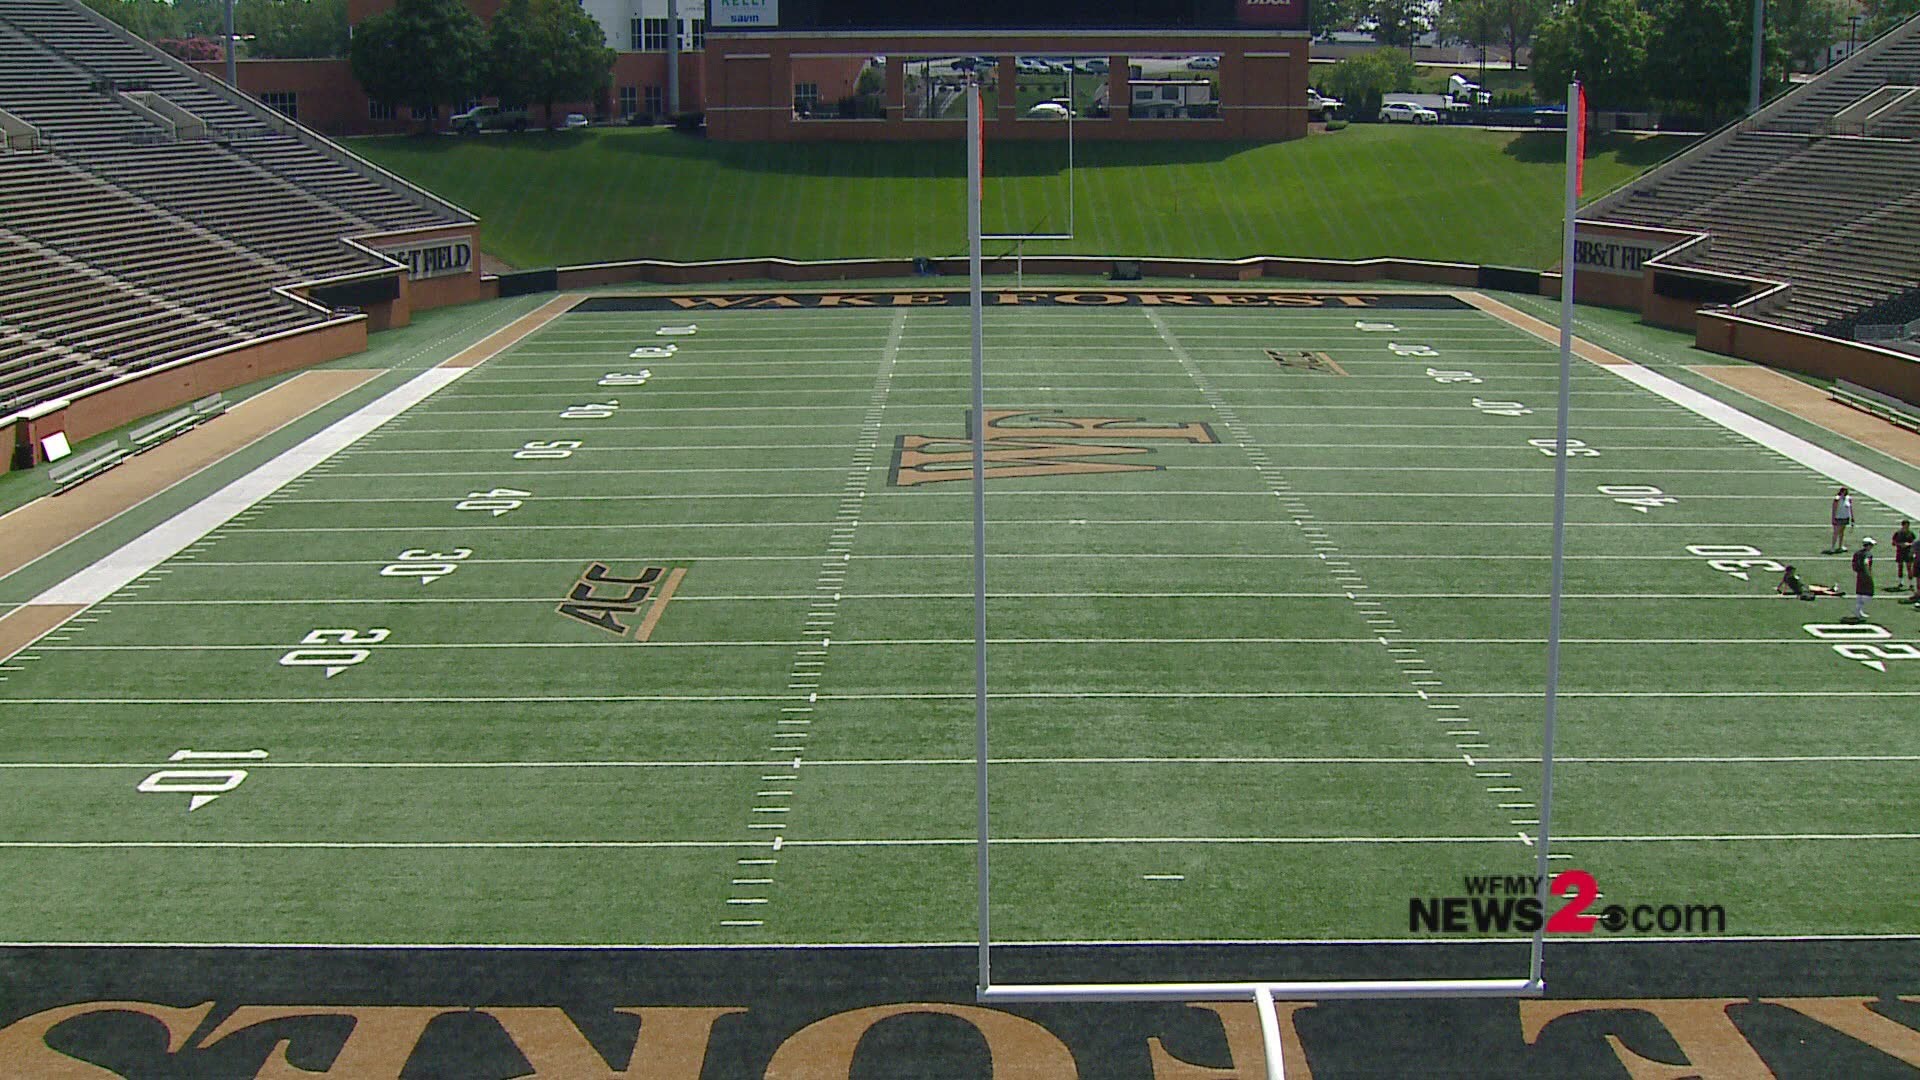 This upcoming football season, BB&T Field will now be known as Truist Field at Wake Forest.